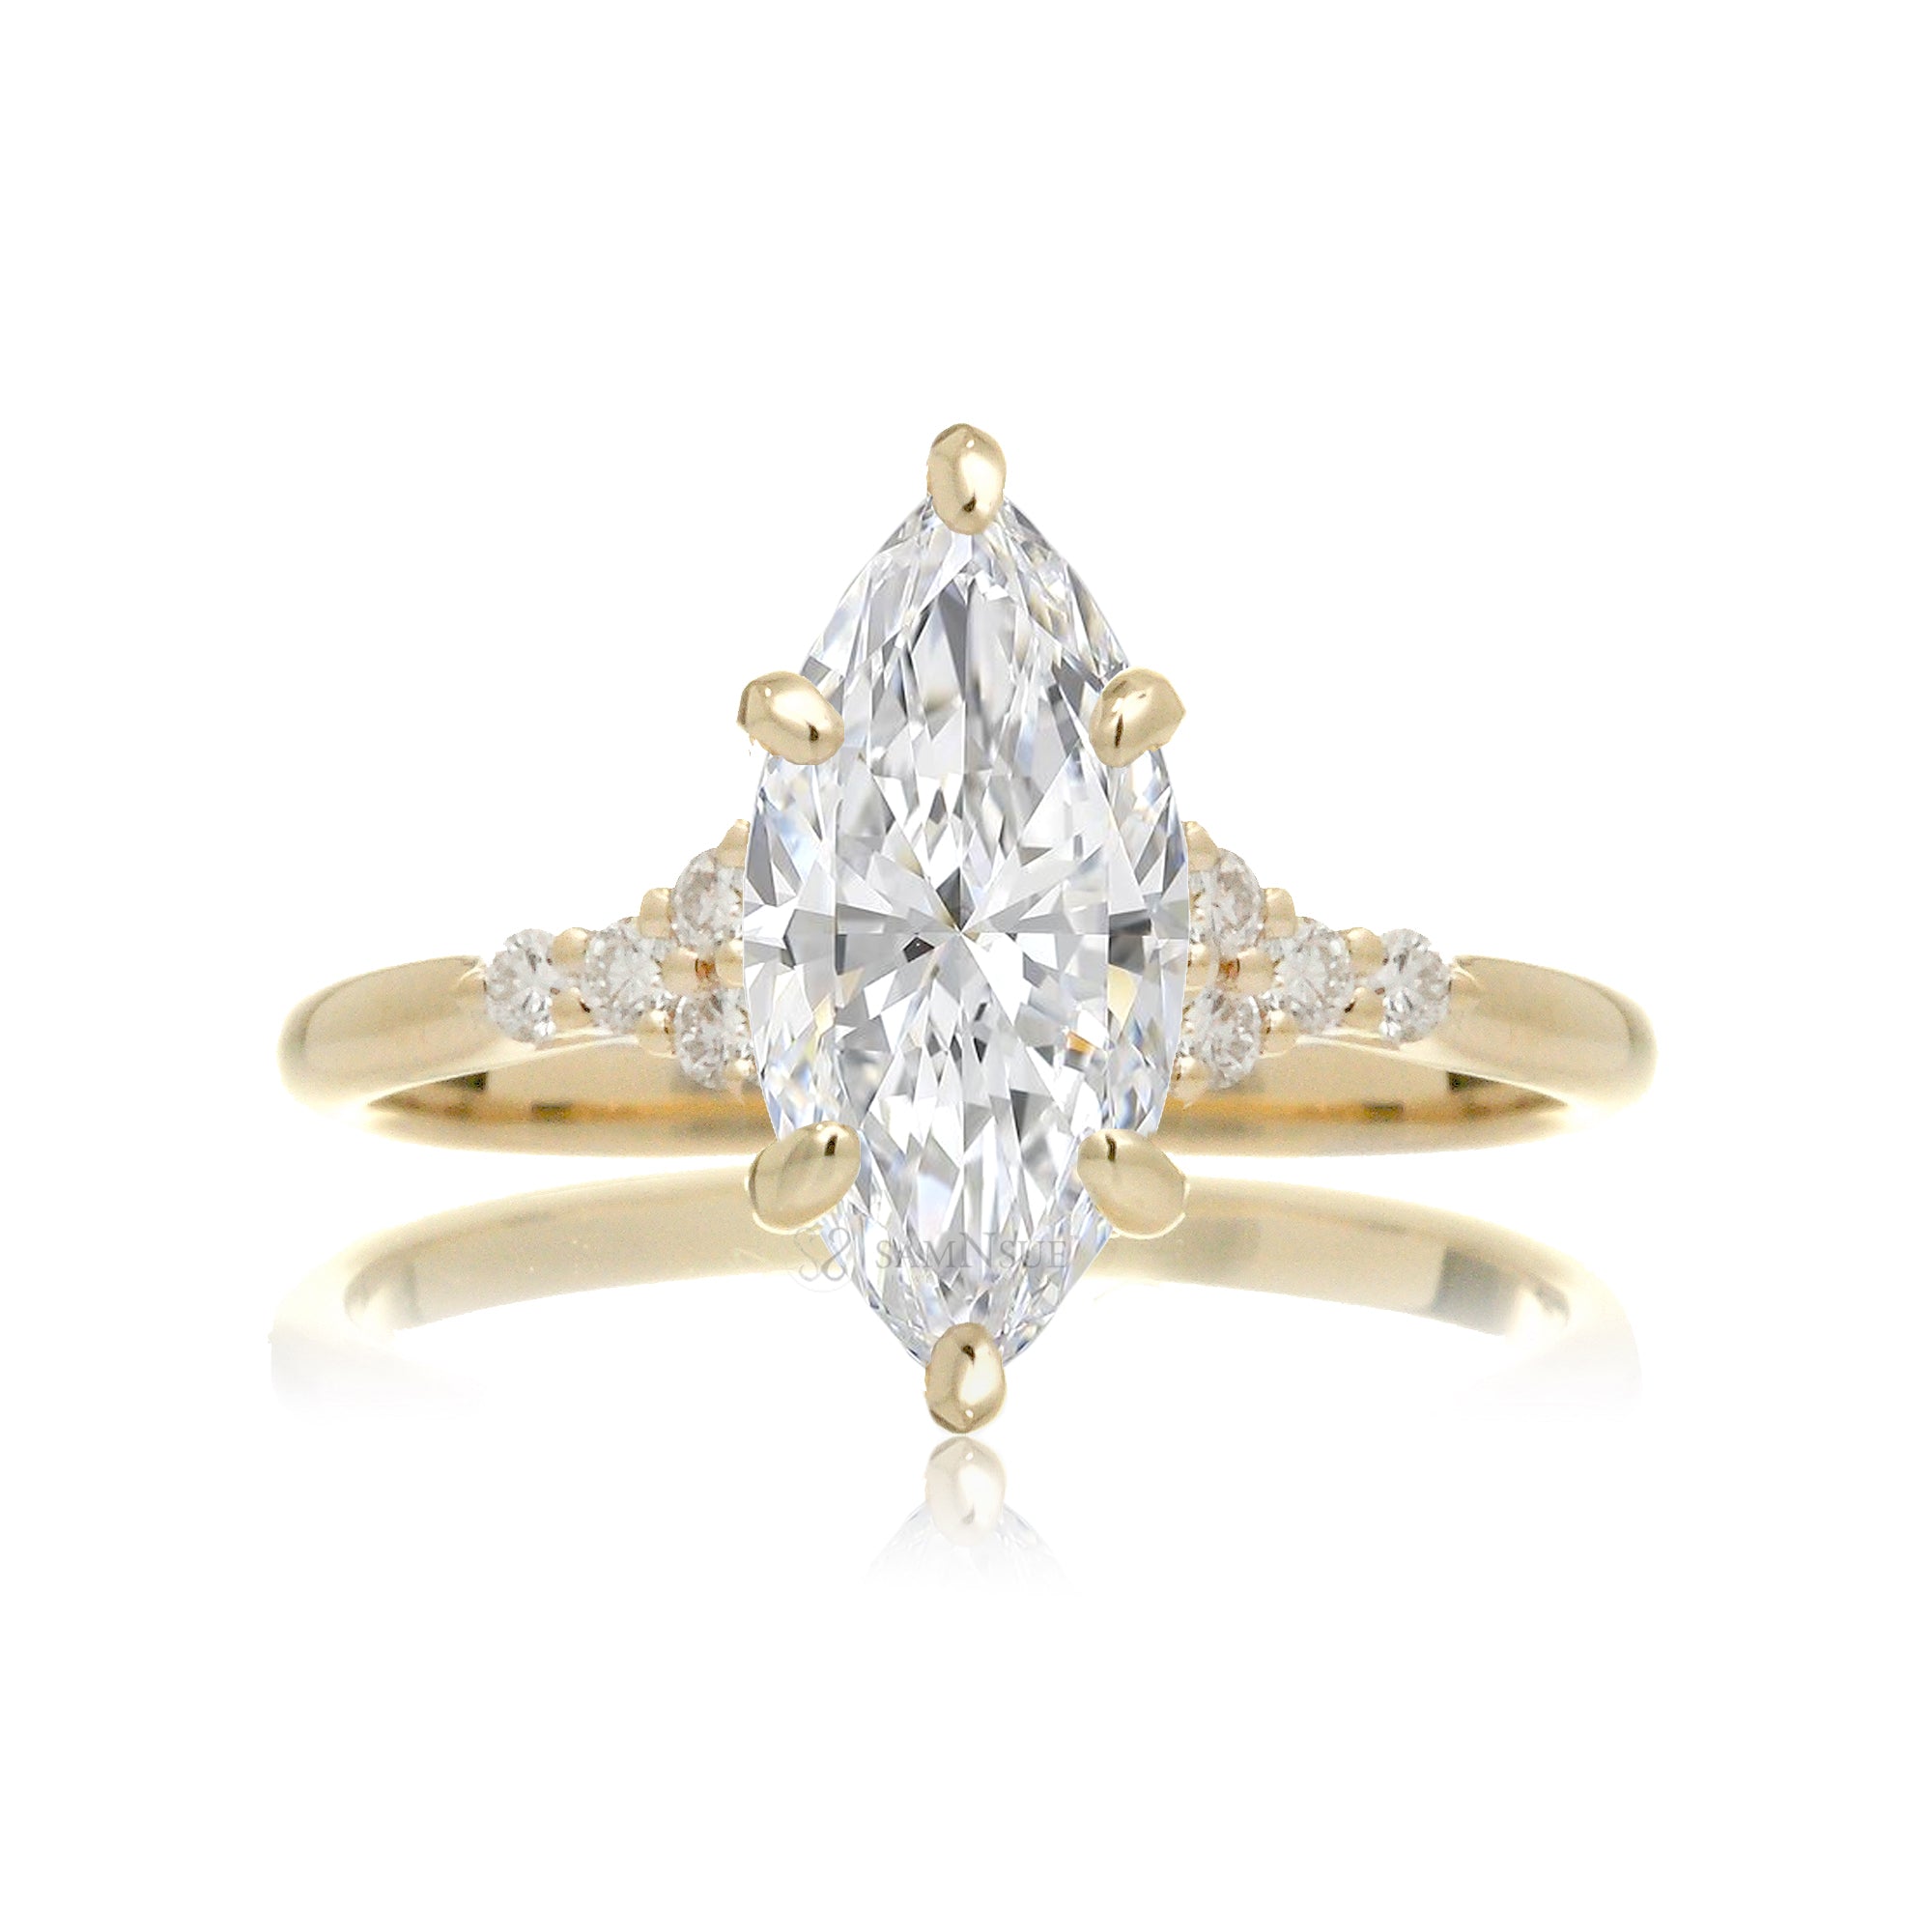 Marquise engagement ring with side stones and a thin comfort fit band in yellow gold - the Chloe